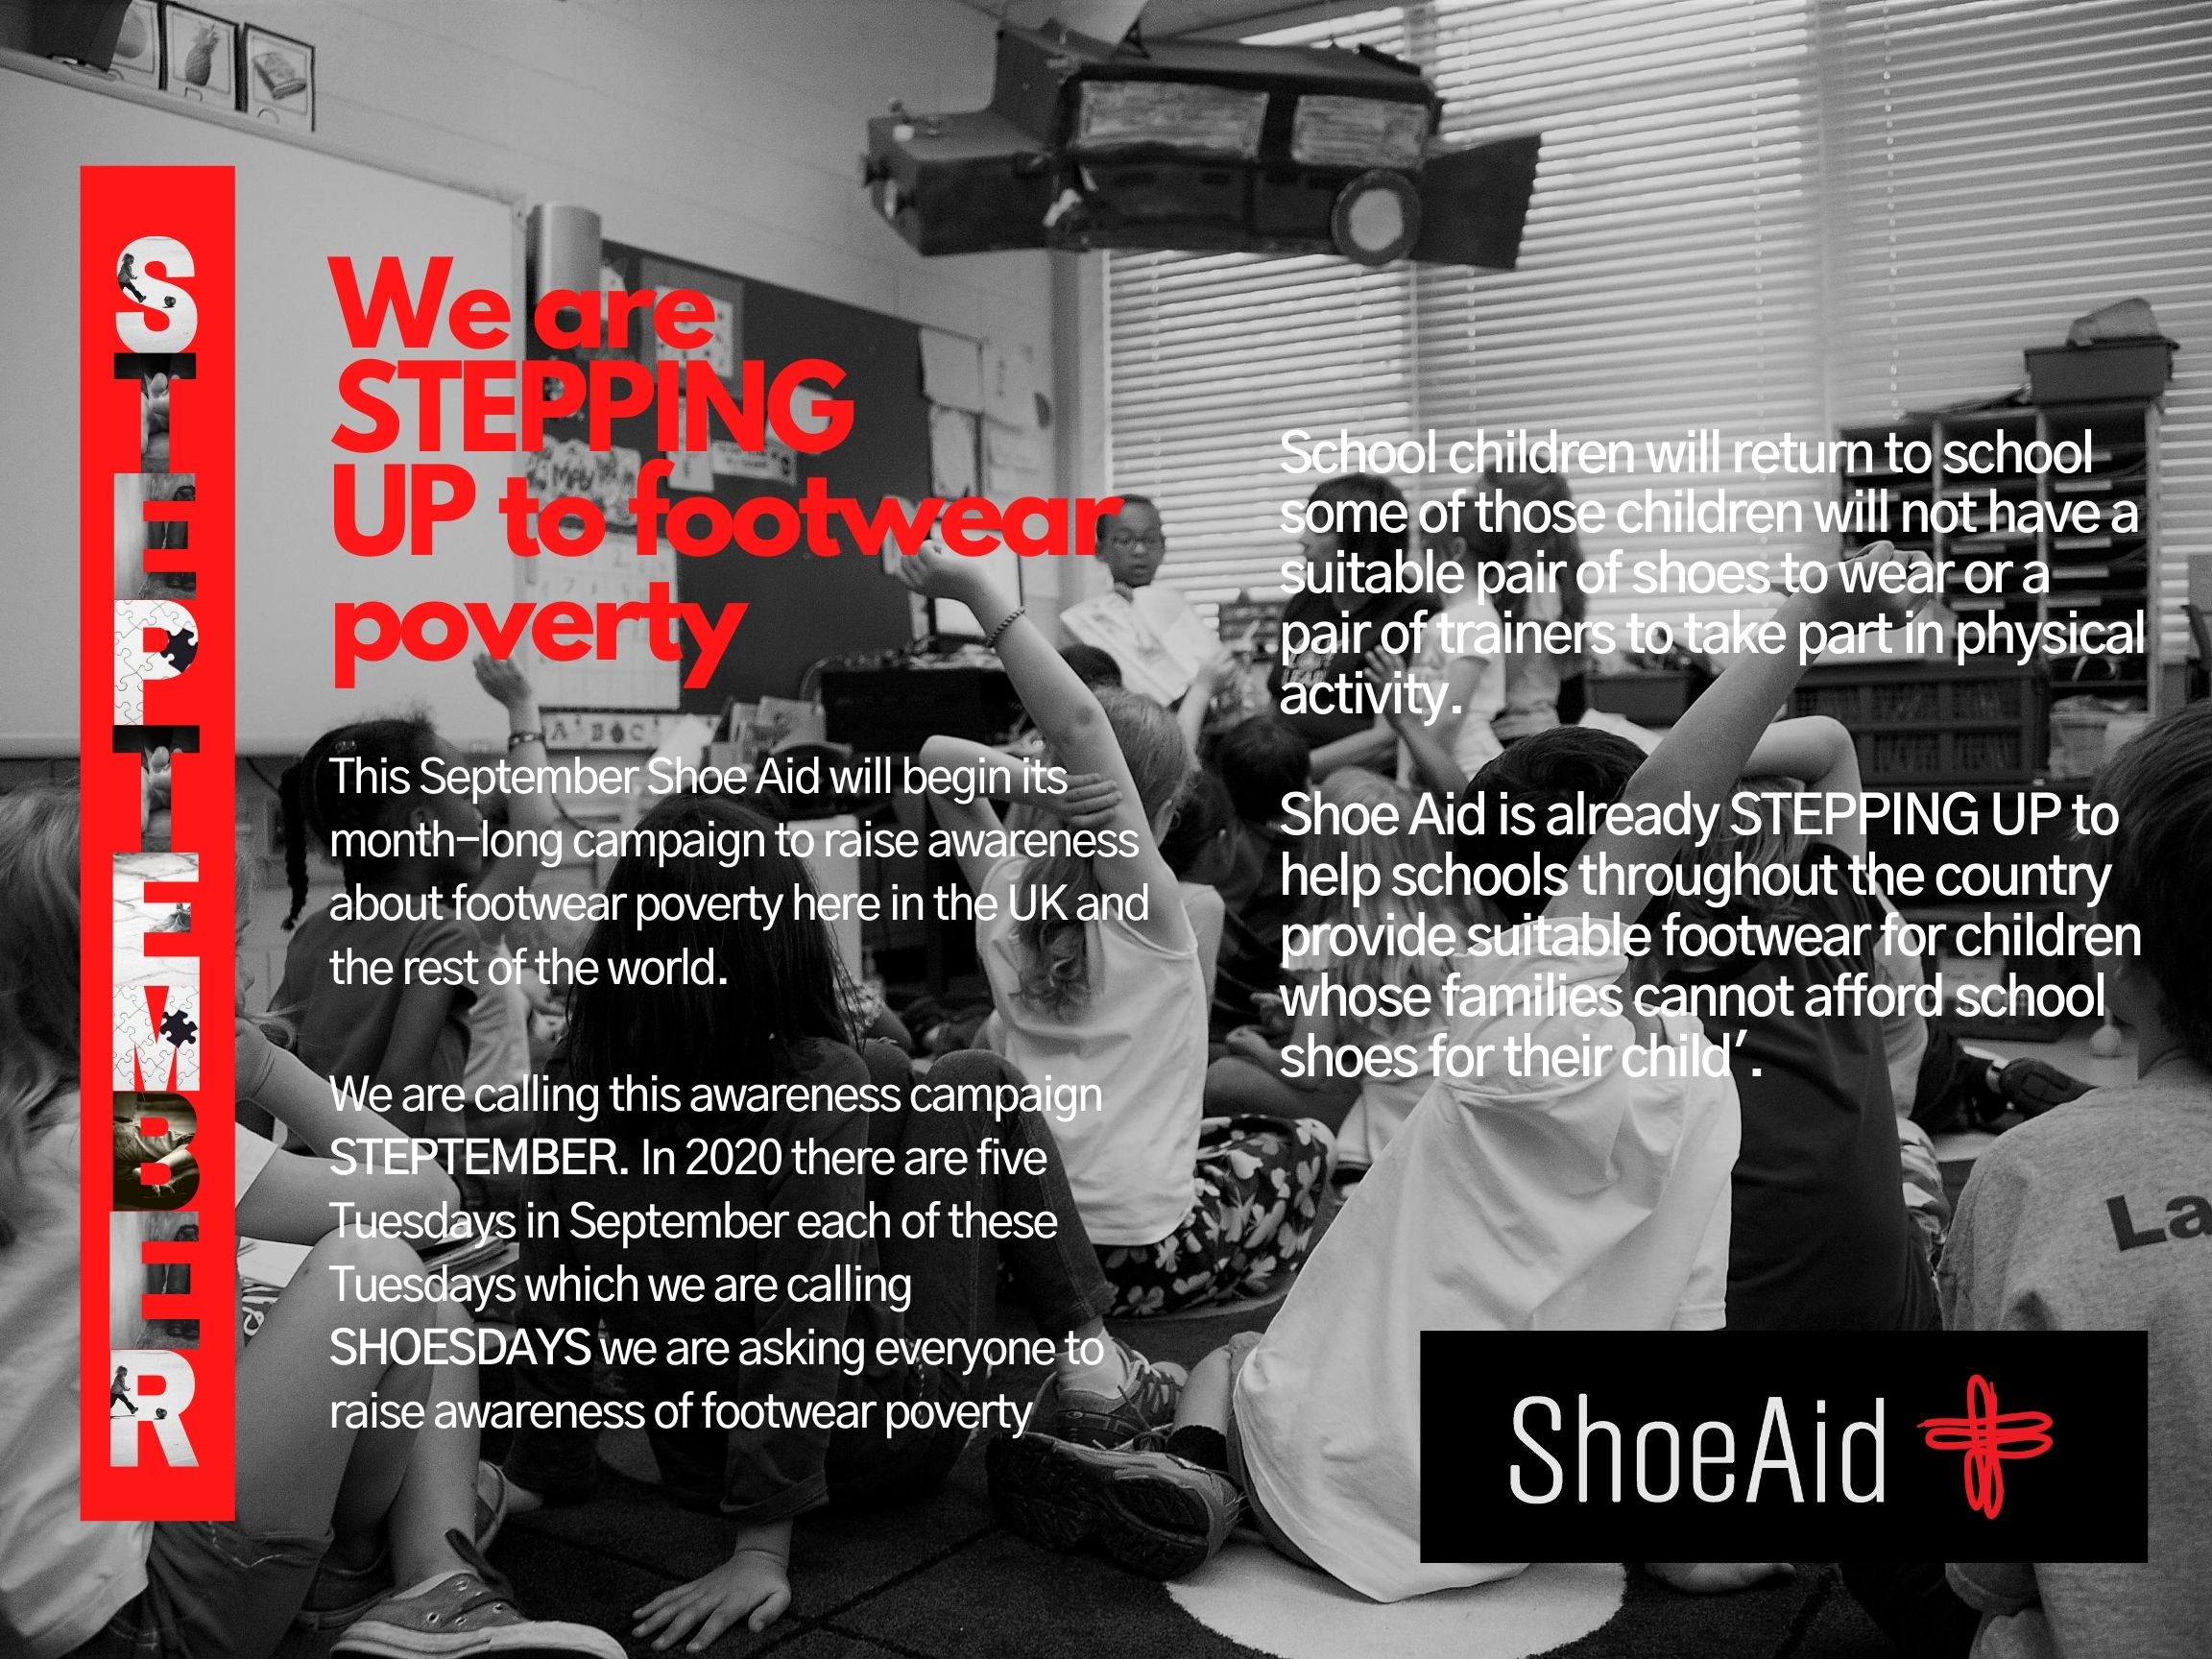 Footwear Charity Shoe Aid STEPS UP to footwear poverty this September